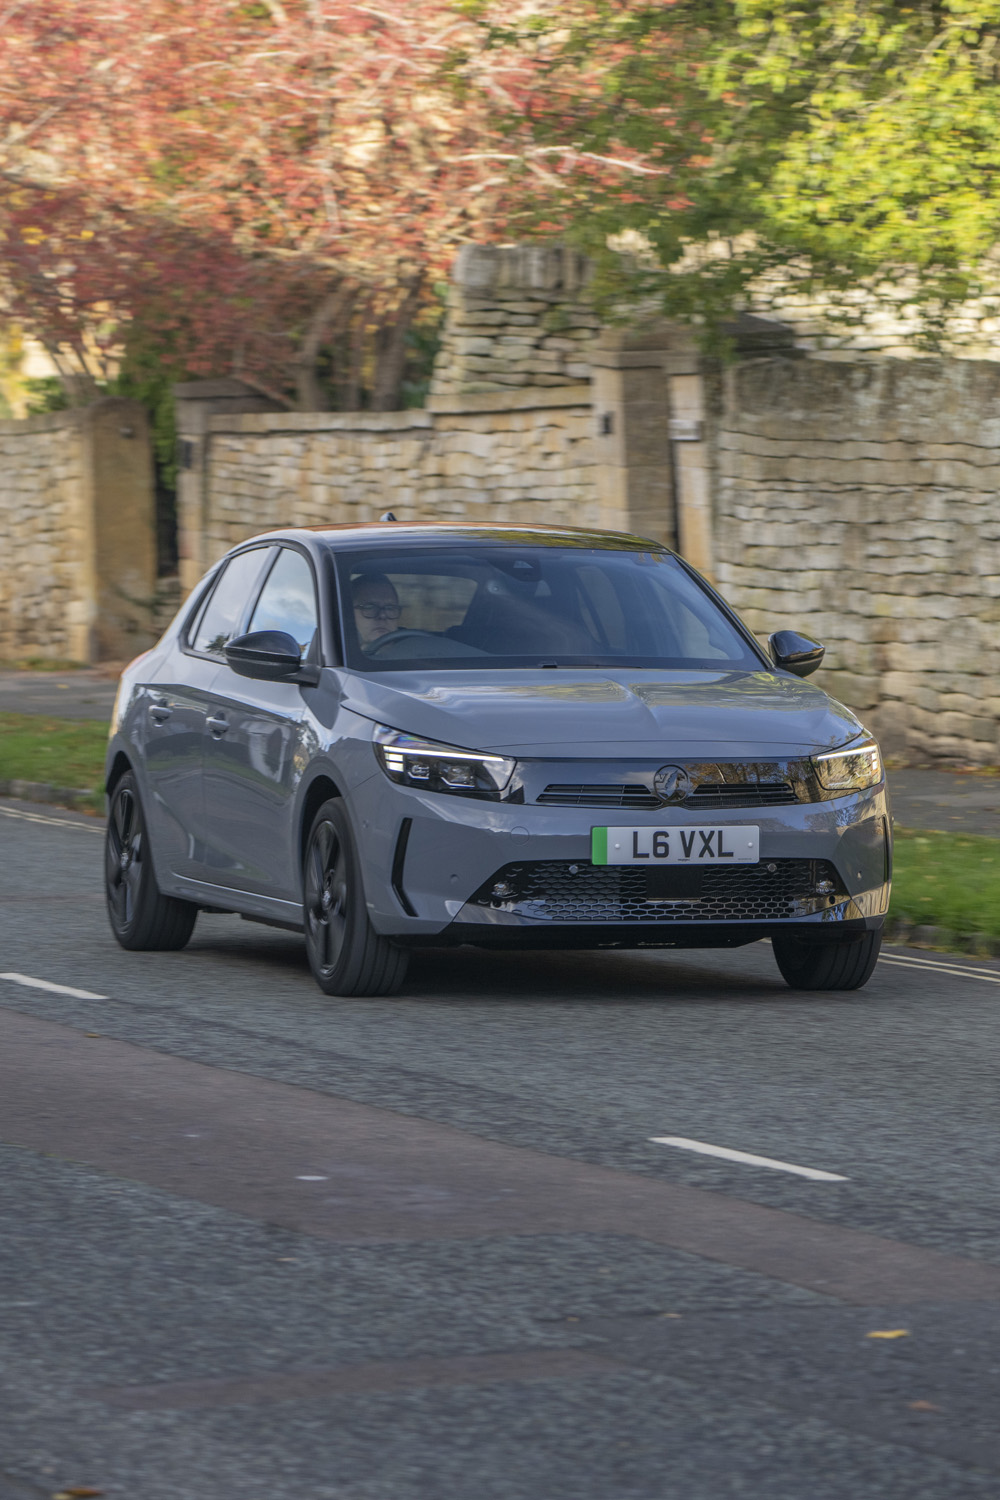 Is The Vauxhall Corsa Electric Ultimate Worth The Extra Spend?